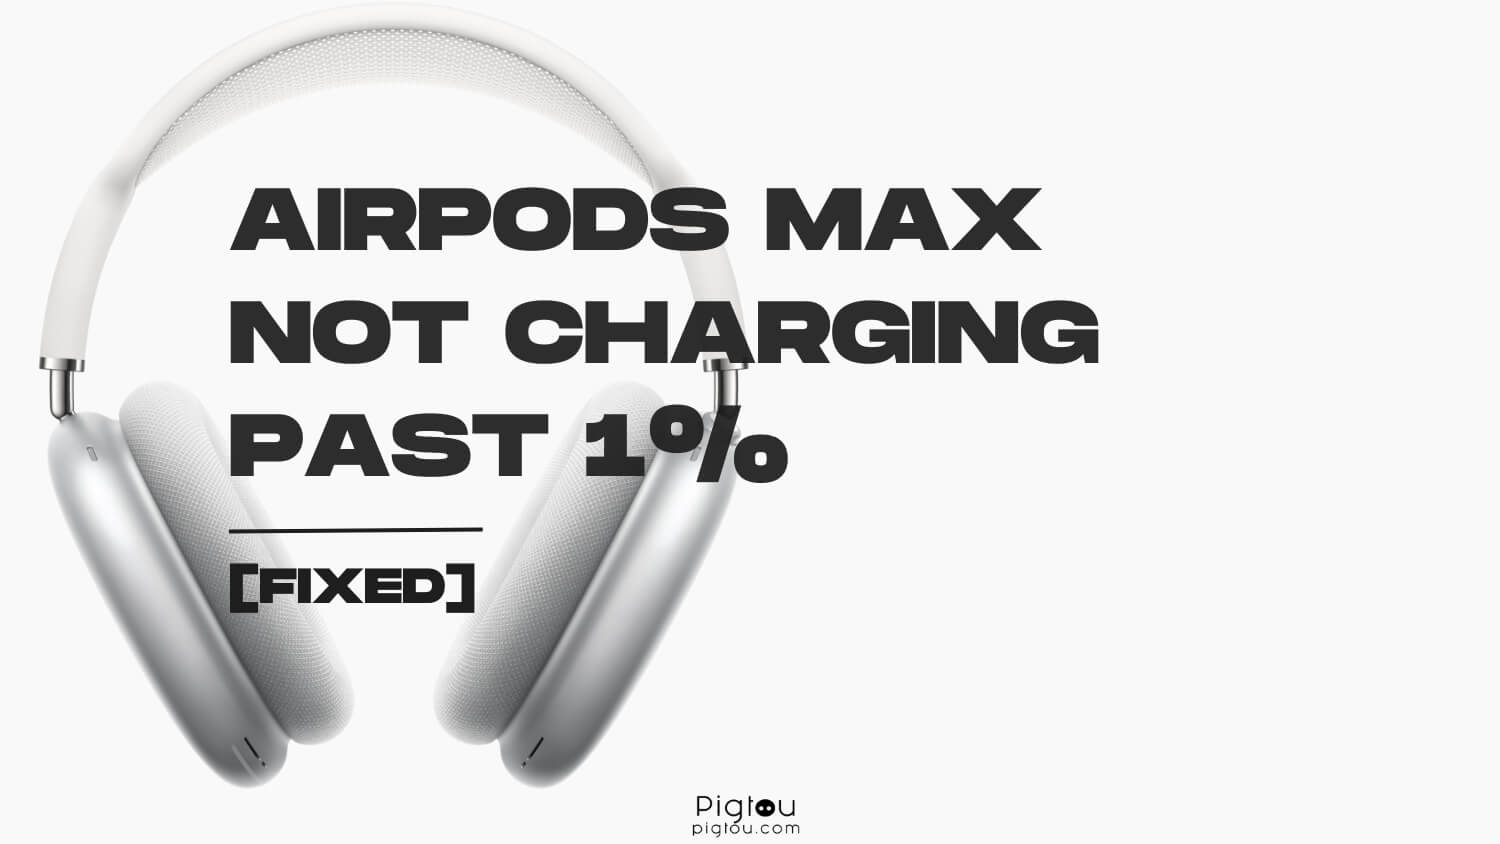 AirPods Max Not Charging Past 1% [FIXED!]